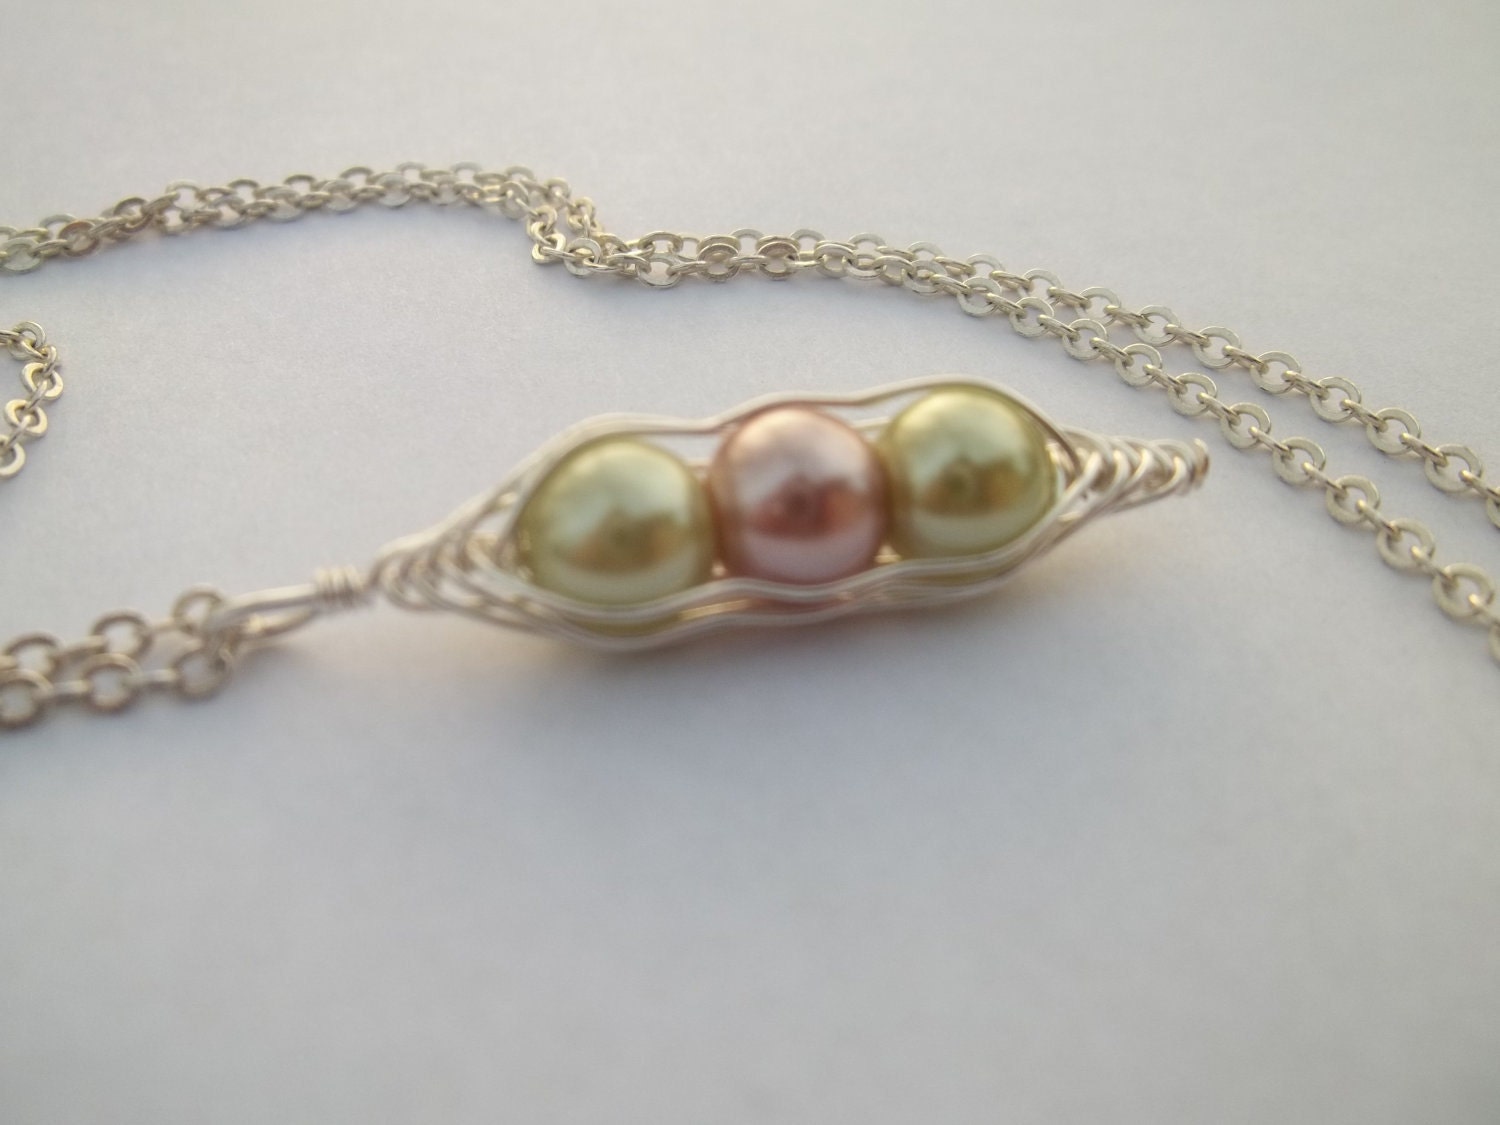   Necklace on Pea Pod Family Necklace By Serissaboutique On Etsy